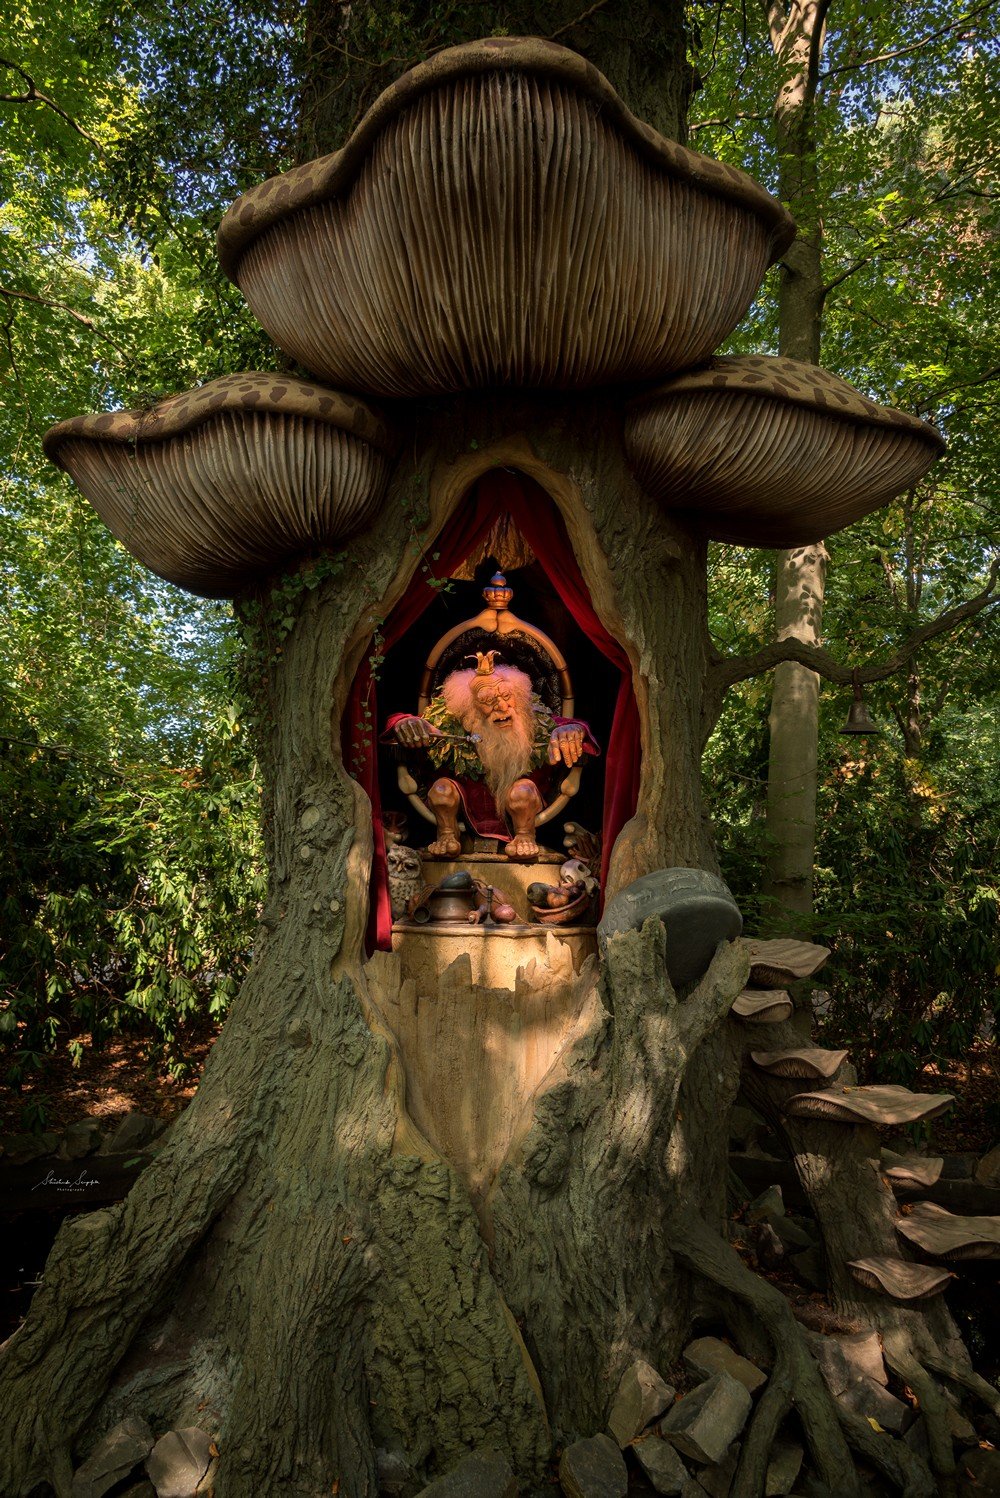 Efteling theme park in Holland - Experience the Fairy tales